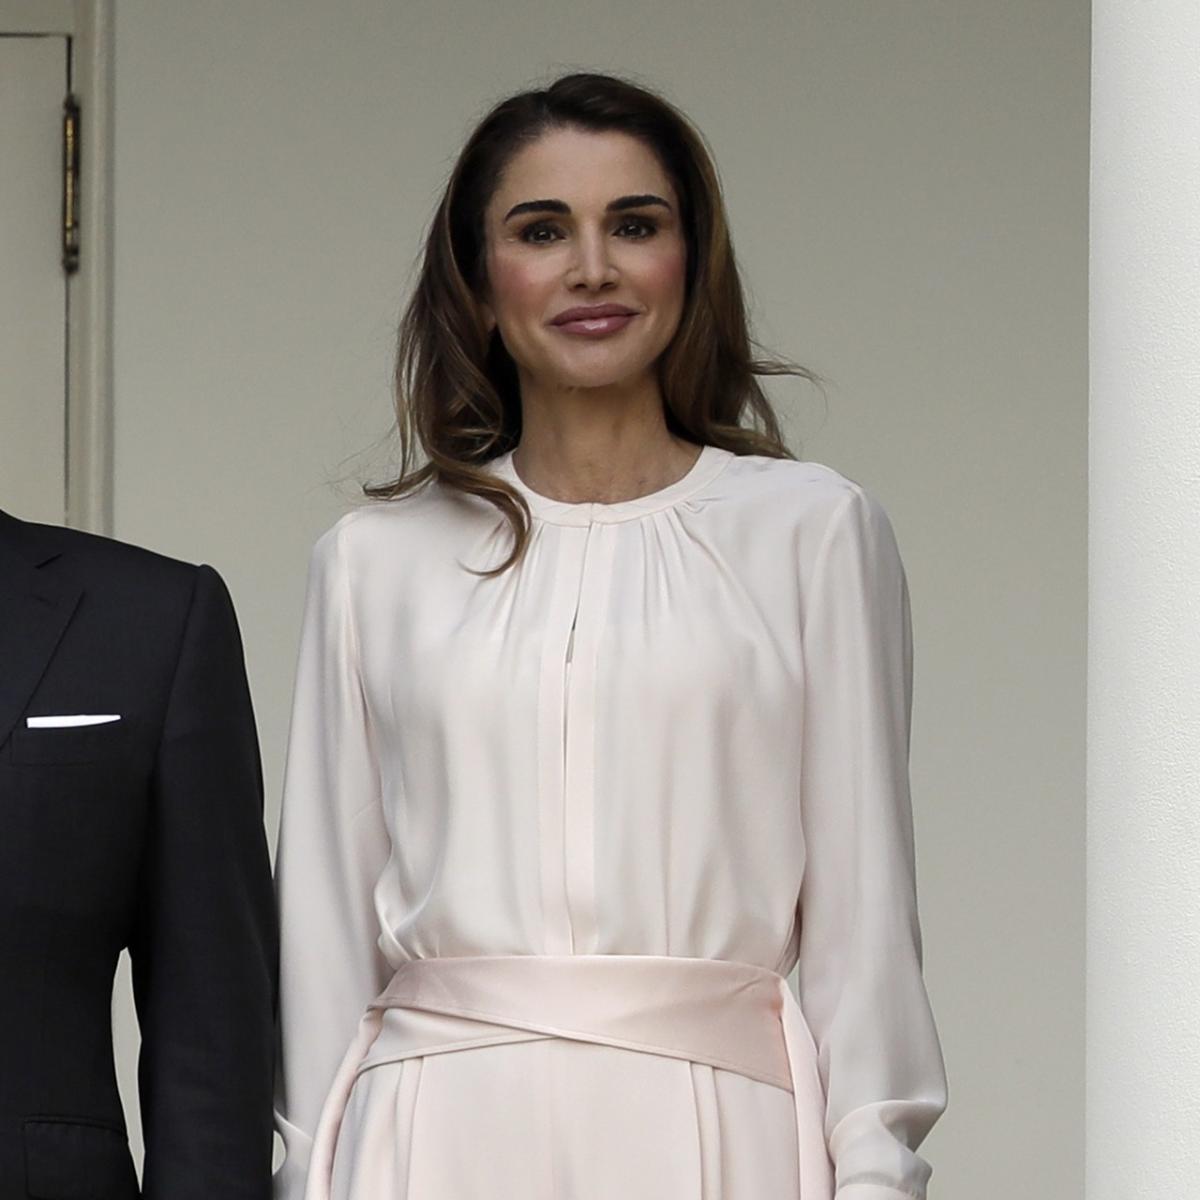 Queen Rania Of Jordan Wears Pink To Visit The White House